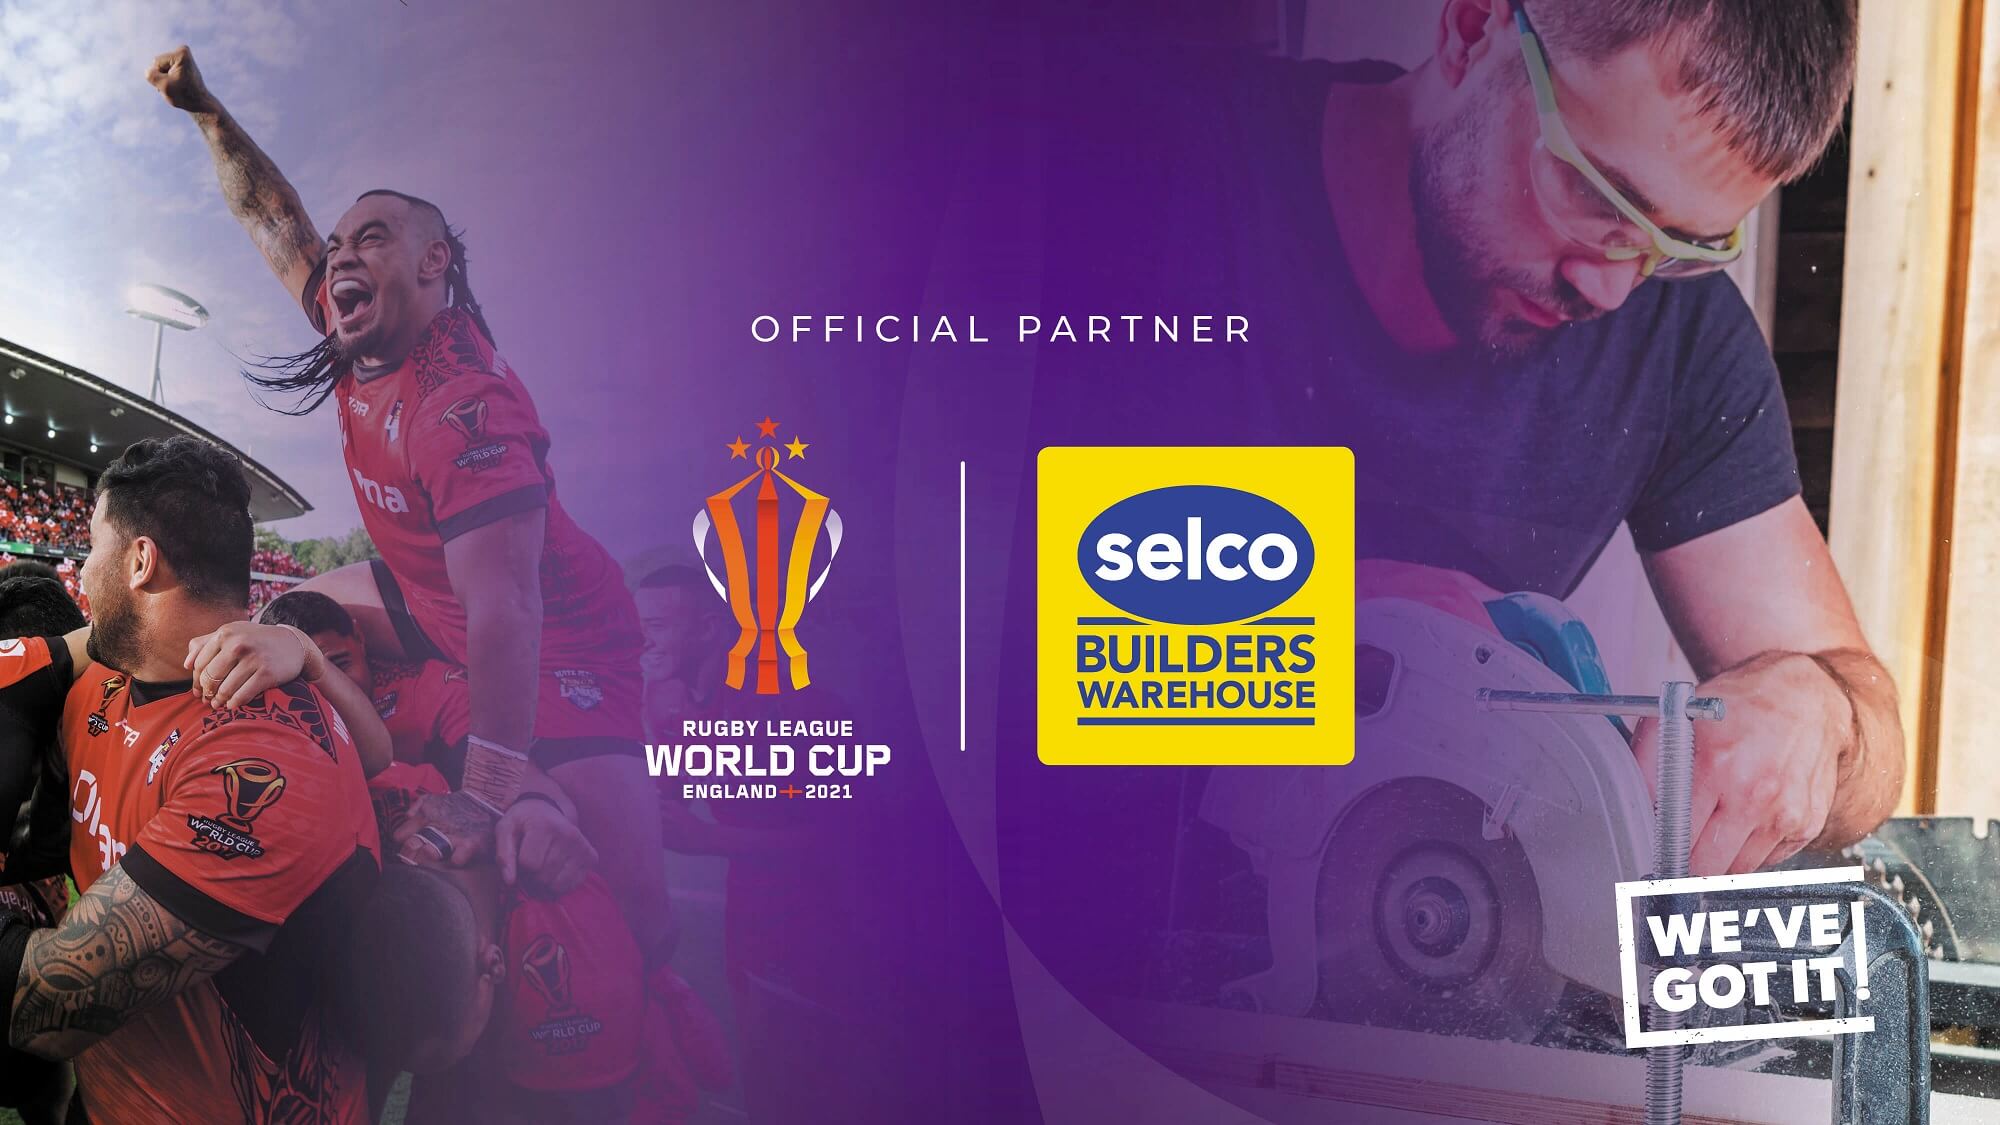 Selco Builders Warehouse and Rugby League World Cup logo